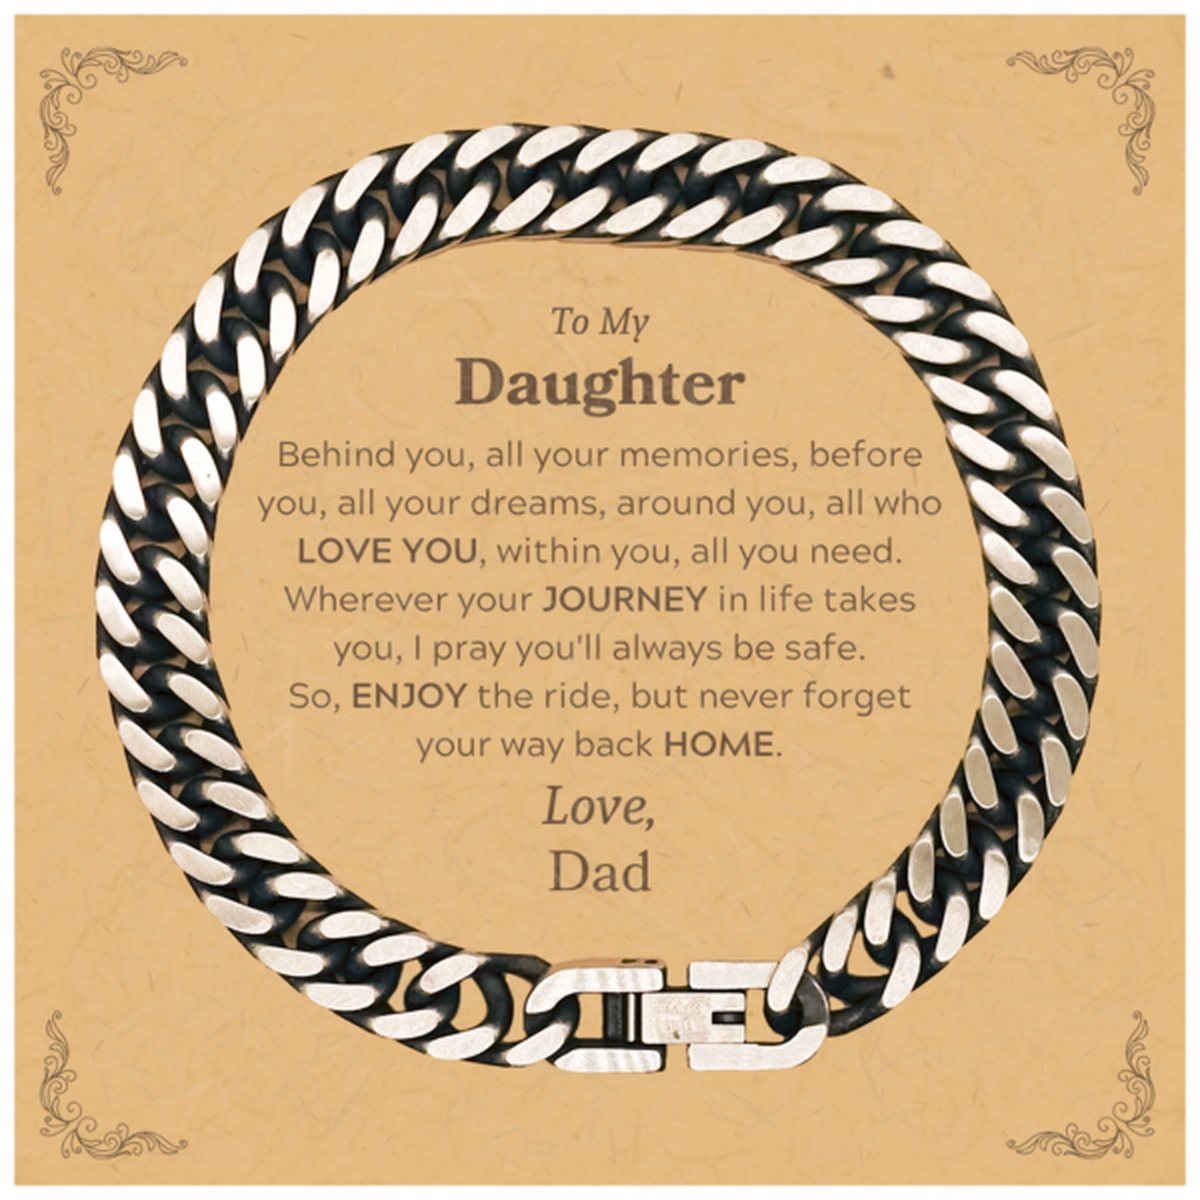 To My Daughter Graduation Gifts from Dad, Daughter Cuban Link Chain Bracelet Christmas Birthday Gifts for Daughter Behind you, all your memories, before you, all your dreams. Love, Dad